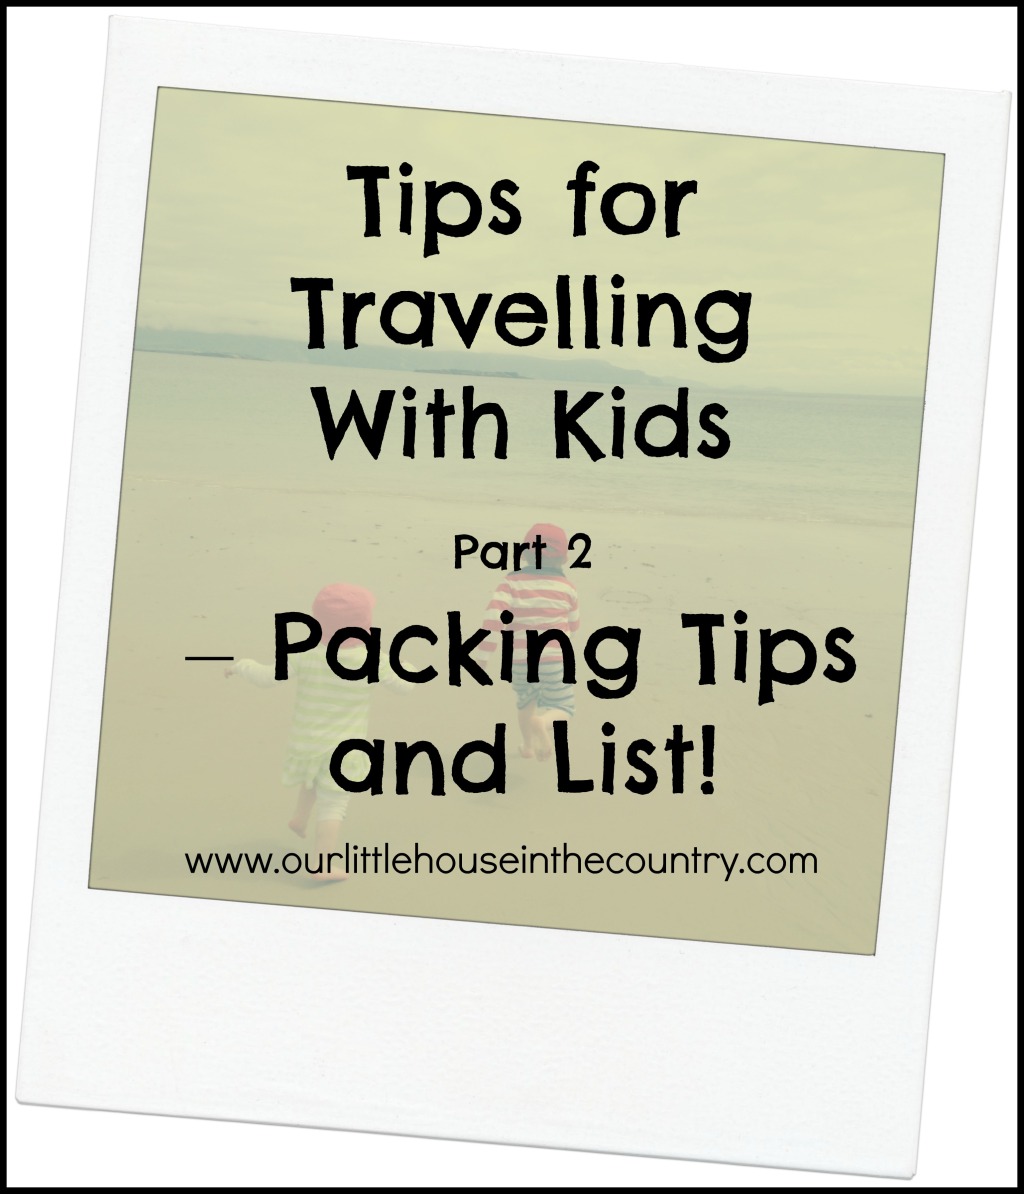 Tips for Travelling With Kids Part 2 – Packing Tips and List!